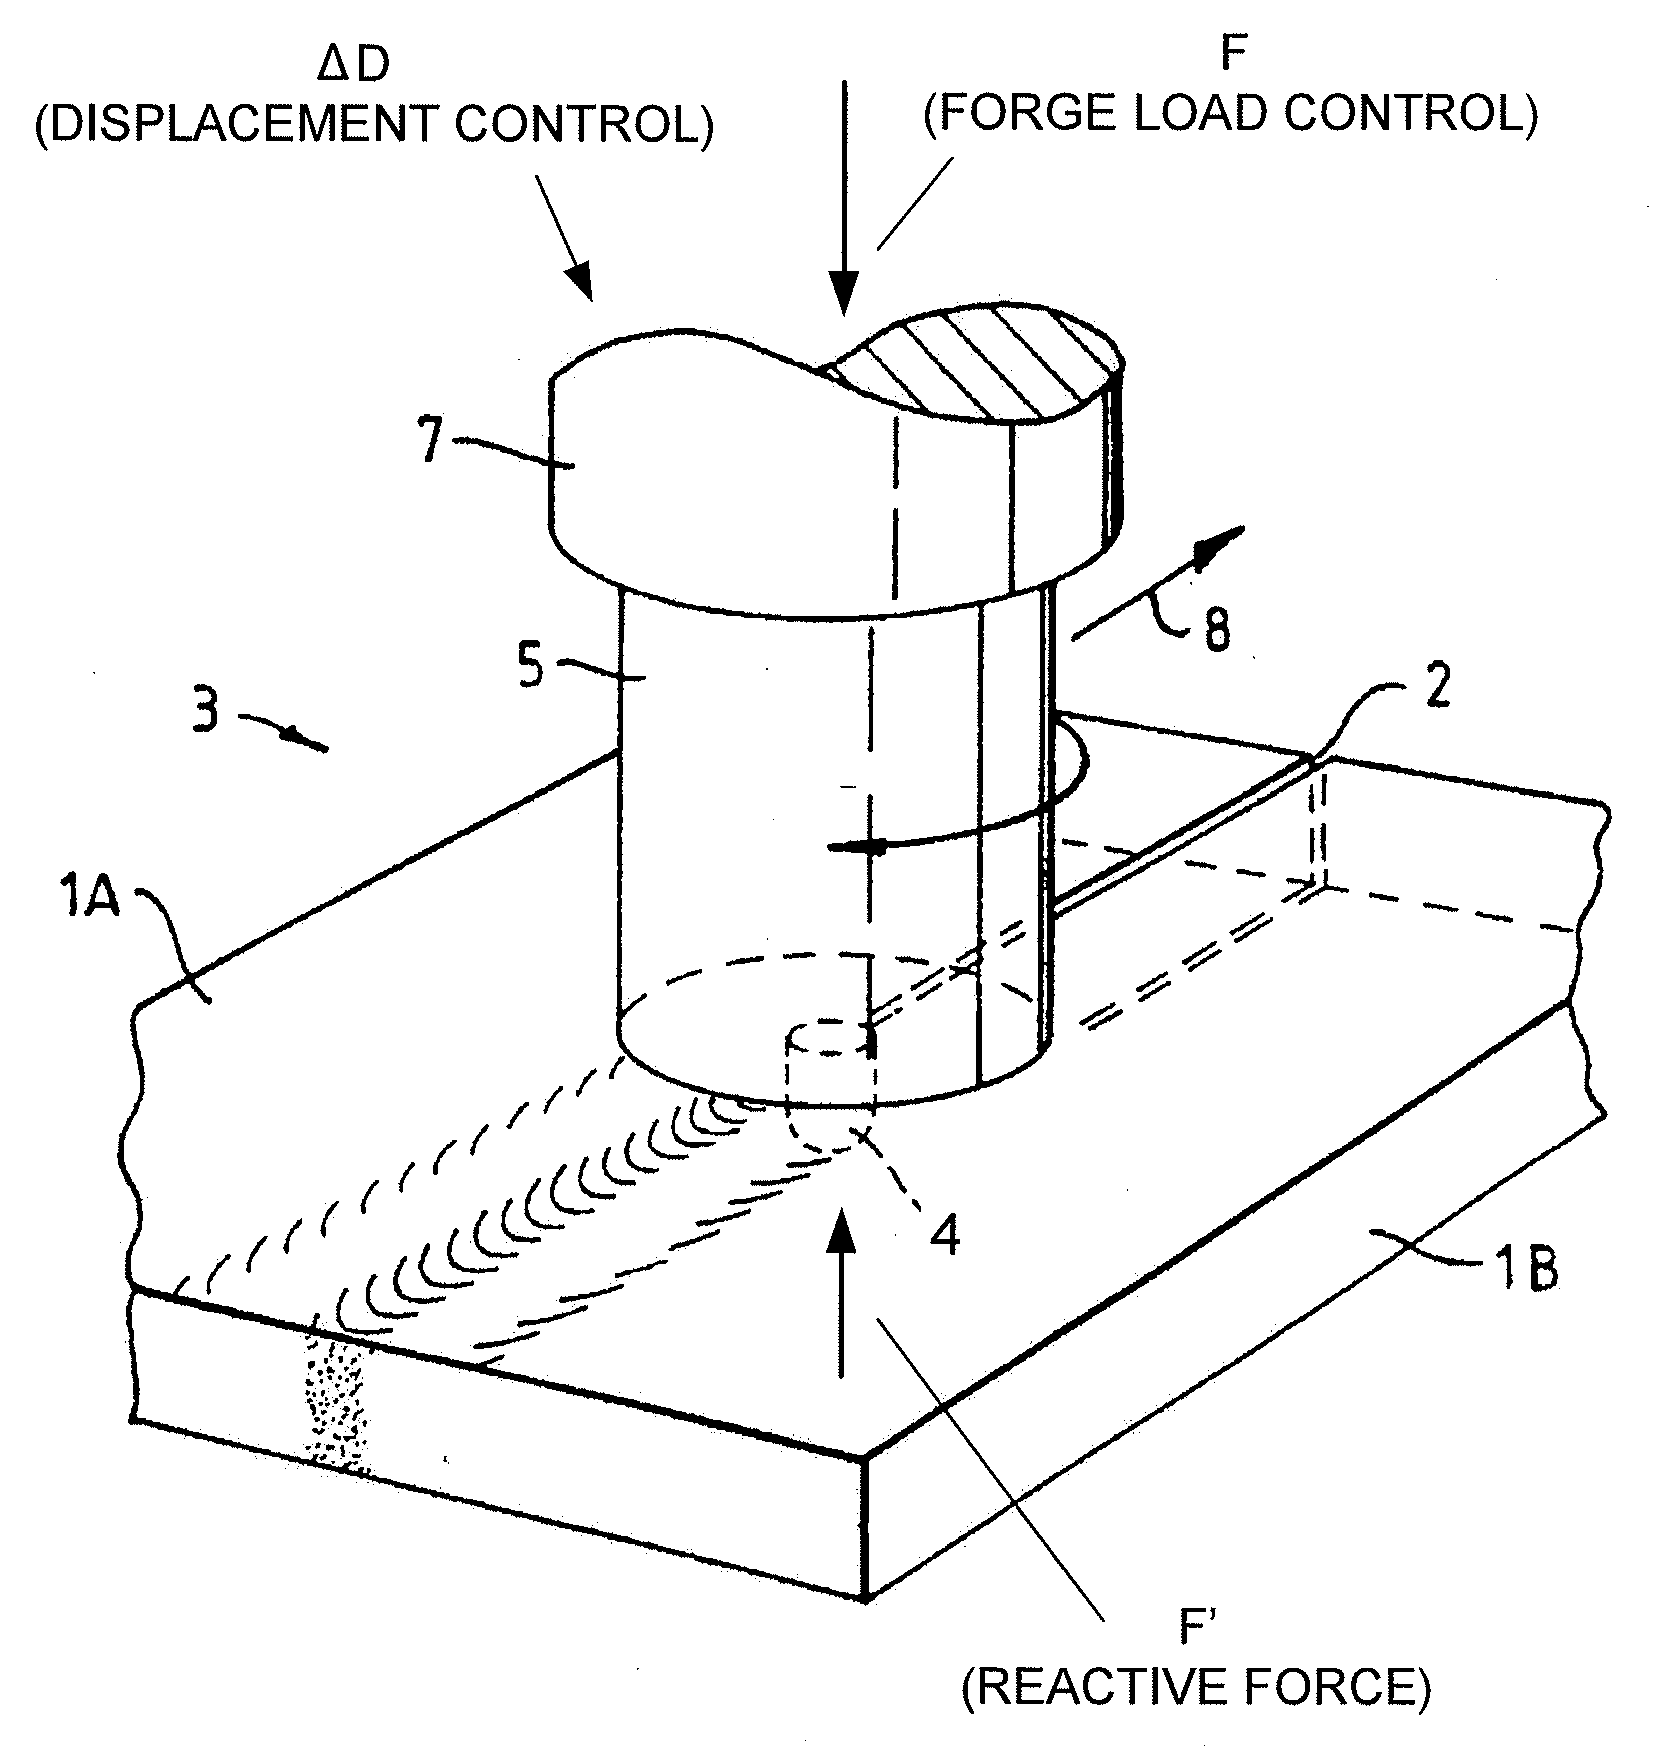 Control systems for friction stir welding of titanium alloys and other high temperature materials